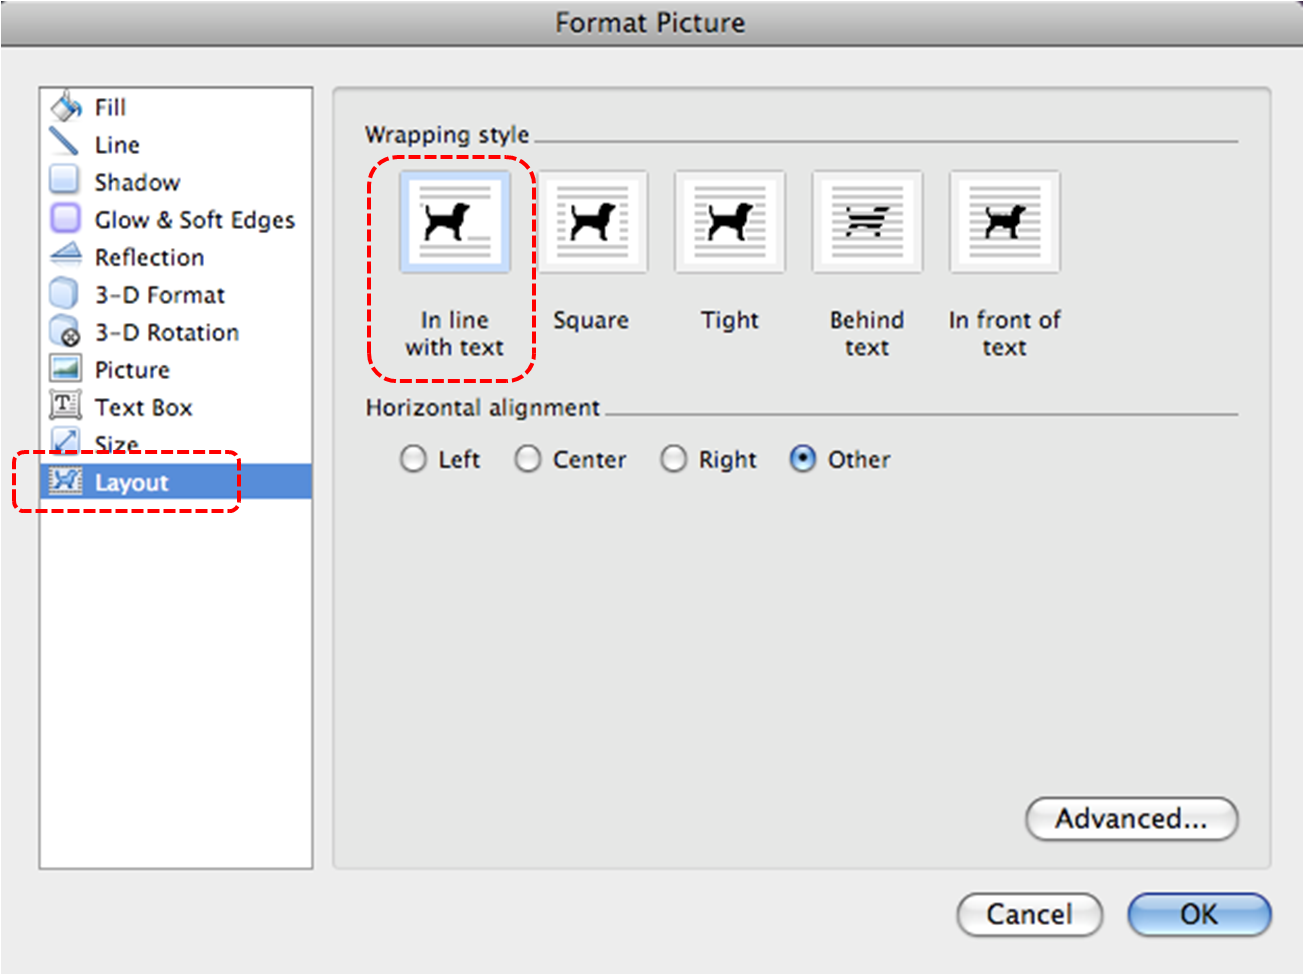 Image demonstrates location of Layout option and In line with text option in Format Picture dialog.